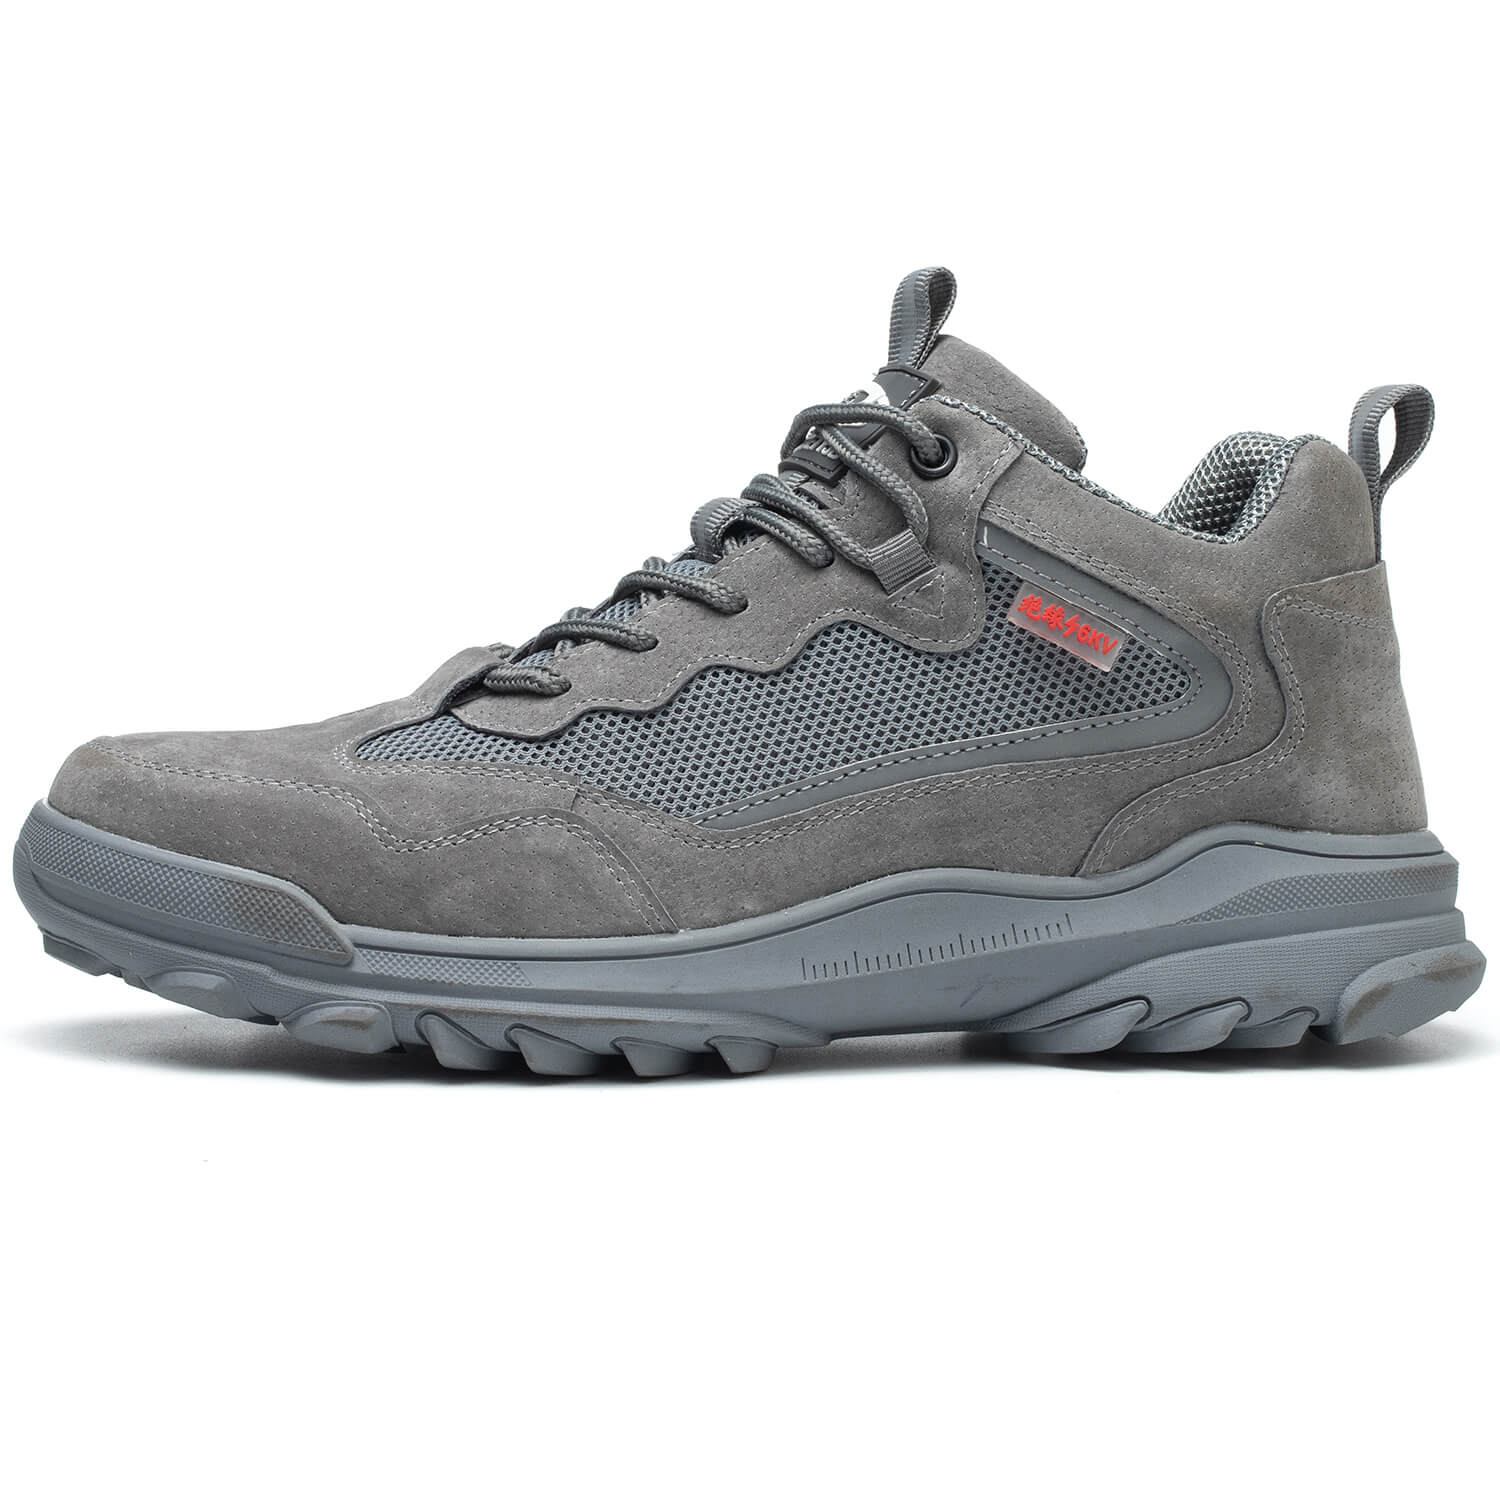 Composite Toe Electrical Hazard Work Shoes